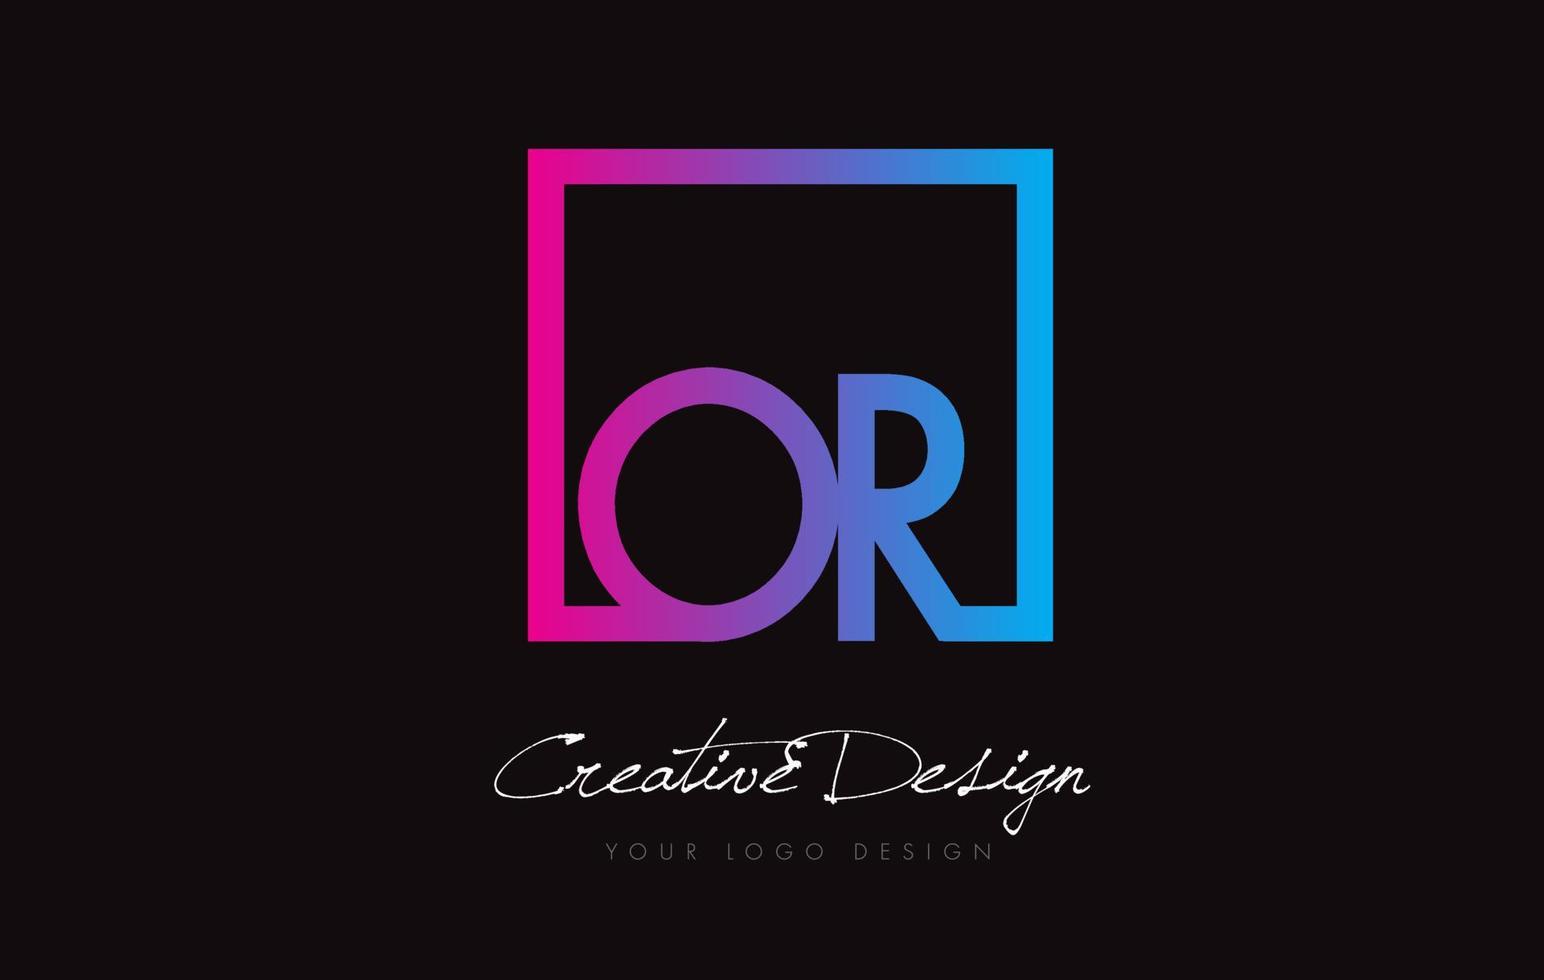 OR Square Frame Letter Logo Design with Purple Blue Colors. vector